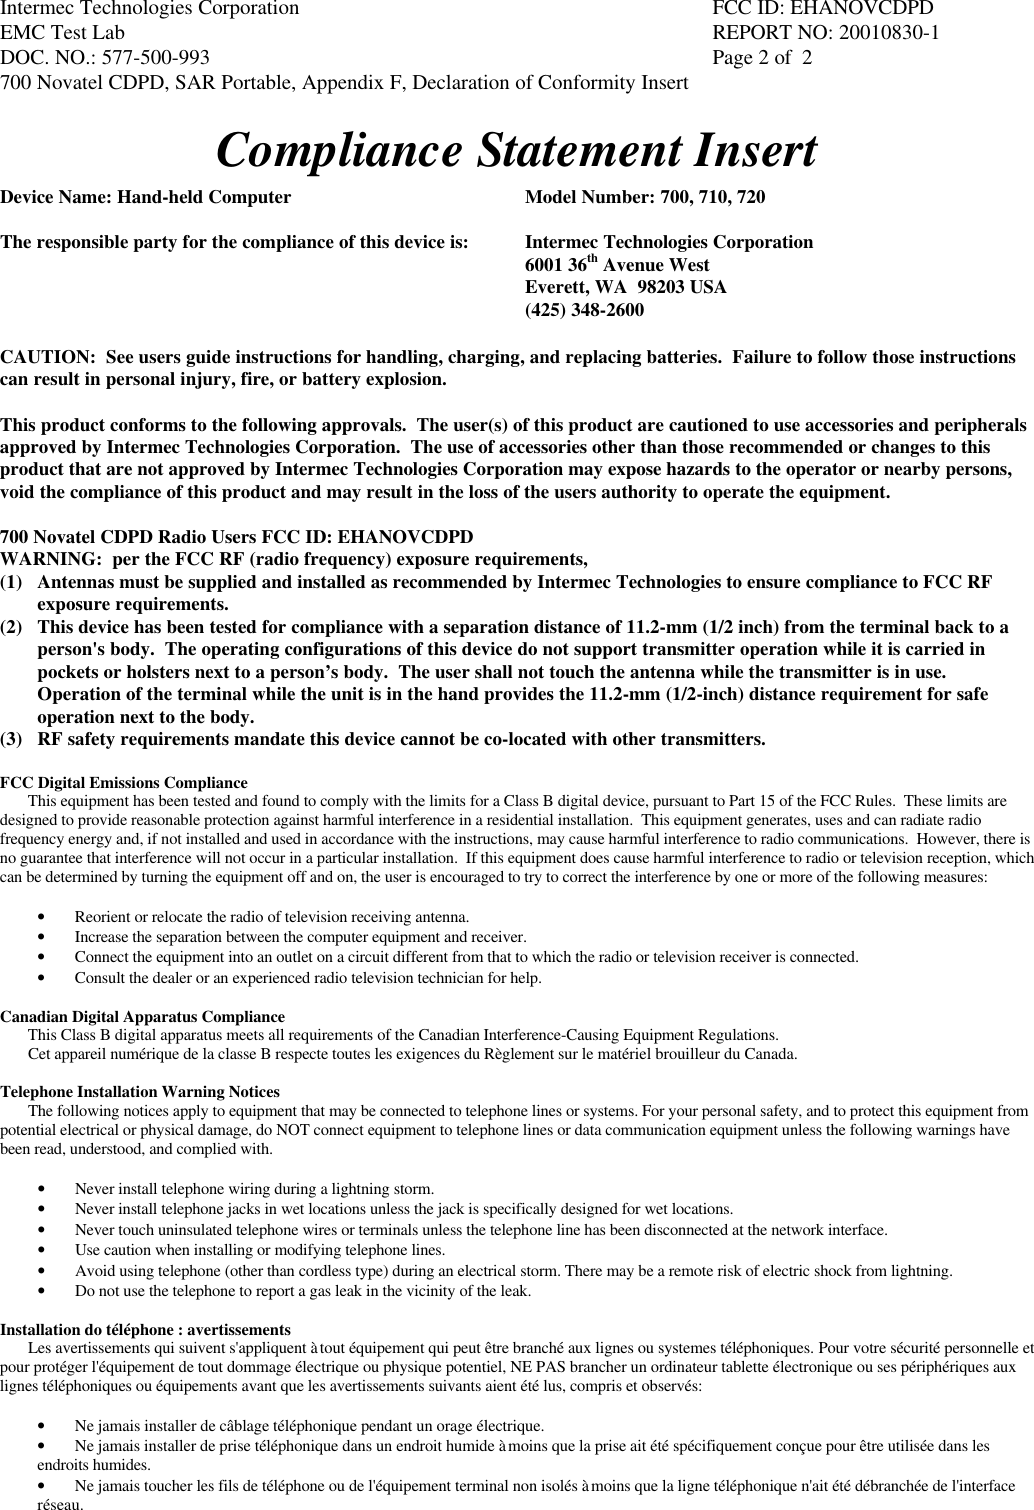 Intermec Technologies Corporation FCC ID: EHANOVCDPDEMC Test Lab REPORT NO: 20010830-1DOC. NO.: 577-500-993  Page 2 of  2700 Novatel CDPD, SAR Portable, Appendix F, Declaration of Conformity InsertCompliance Statement InsertDevice Name: Hand-held Computer Model Number: 700, 710, 720The responsible party for the compliance of this device is: Intermec Technologies Corporation6001 36th Avenue WestEverett, WA  98203 USA(425) 348-2600CAUTION:  See users guide instructions for handling, charging, and replacing batteries.  Failure to follow those instructionscan result in personal injury, fire, or battery explosion.This product conforms to the following approvals.  The user(s) of this product are cautioned to use accessories and peripheralsapproved by Intermec Technologies Corporation.  The use of accessories other than those recommended or changes to thisproduct that are not approved by Intermec Technologies Corporation may expose hazards to the operator or nearby persons,void the compliance of this product and may result in the loss of the users authority to operate the equipment.700 Novatel CDPD Radio Users FCC ID: EHANOVCDPDWARNING:  per the FCC RF (radio frequency) exposure requirements,(1) Antennas must be supplied and installed as recommended by Intermec Technologies to ensure compliance to FCC RFexposure requirements.(2) This device has been tested for compliance with a separation distance of 11.2-mm (1/2 inch) from the terminal back to aperson&apos;s body.  The operating configurations of this device do not support transmitter operation while it is carried inpockets or holsters next to a person’s body.  The user shall not touch the antenna while the transmitter is in use.Operation of the terminal while the unit is in the hand provides the 11.2-mm (1/2-inch) distance requirement for safeoperation next to the body.(3) RF safety requirements mandate this device cannot be co-located with other transmitters.FCC Digital Emissions ComplianceThis equipment has been tested and found to comply with the limits for a Class B digital device, pursuant to Part 15 of the FCC Rules.  These limits aredesigned to provide reasonable protection against harmful interference in a residential installation.  This equipment generates, uses and can radiate radiofrequency energy and, if not installed and used in accordance with the instructions, may cause harmful interference to radio communications.  However, there isno guarantee that interference will not occur in a particular installation.  If this equipment does cause harmful interference to radio or television reception, whichcan be determined by turning the equipment off and on, the user is encouraged to try to correct the interference by one or more of the following measures:• Reorient or relocate the radio of television receiving antenna.• Increase the separation between the computer equipment and receiver.• Connect the equipment into an outlet on a circuit different from that to which the radio or television receiver is connected.• Consult the dealer or an experienced radio television technician for help.Canadian Digital Apparatus ComplianceThis Class B digital apparatus meets all requirements of the Canadian Interference-Causing Equipment Regulations.Cet appareil numérique de la classe B respecte toutes les exigences du Règlement sur le matériel brouilleur du Canada.Telephone Installation Warning NoticesThe following notices apply to equipment that may be connected to telephone lines or systems. For your personal safety, and to protect this equipment frompotential electrical or physical damage, do NOT connect equipment to telephone lines or data communication equipment unless the following warnings havebeen read, understood, and complied with.• Never install telephone wiring during a lightning storm.• Never install telephone jacks in wet locations unless the jack is specifically designed for wet locations.• Never touch uninsulated telephone wires or terminals unless the telephone line has been disconnected at the network interface.• Use caution when installing or modifying telephone lines.• Avoid using telephone (other than cordless type) during an electrical storm. There may be a remote risk of electric shock from lightning.• Do not use the telephone to report a gas leak in the vicinity of the leak.Installation do téléphone : avertissementsLes avertissements qui suivent s&apos;appliquent à tout équipement qui peut être branché aux lignes ou systemes téléphoniques. Pour votre sécurité personnelle etpour protéger l&apos;équipement de tout dommage électrique ou physique potentiel, NE PAS brancher un ordinateur tablette électronique ou ses périphériques auxlignes téléphoniques ou équipements avant que les avertissements suivants aient été lus, compris et observés:• Ne jamais installer de câblage téléphonique pendant un orage électrique.• Ne jamais installer de prise téléphonique dans un endroit humide à moins que la prise ait été spécifiquement conçue pour être utilisée dans lesendroits humides.• Ne jamais toucher les fils de téléphone ou de l&apos;équipement terminal non isolés à moins que la ligne téléphonique n&apos;ait été débranchée de l&apos;interfaceréseau.